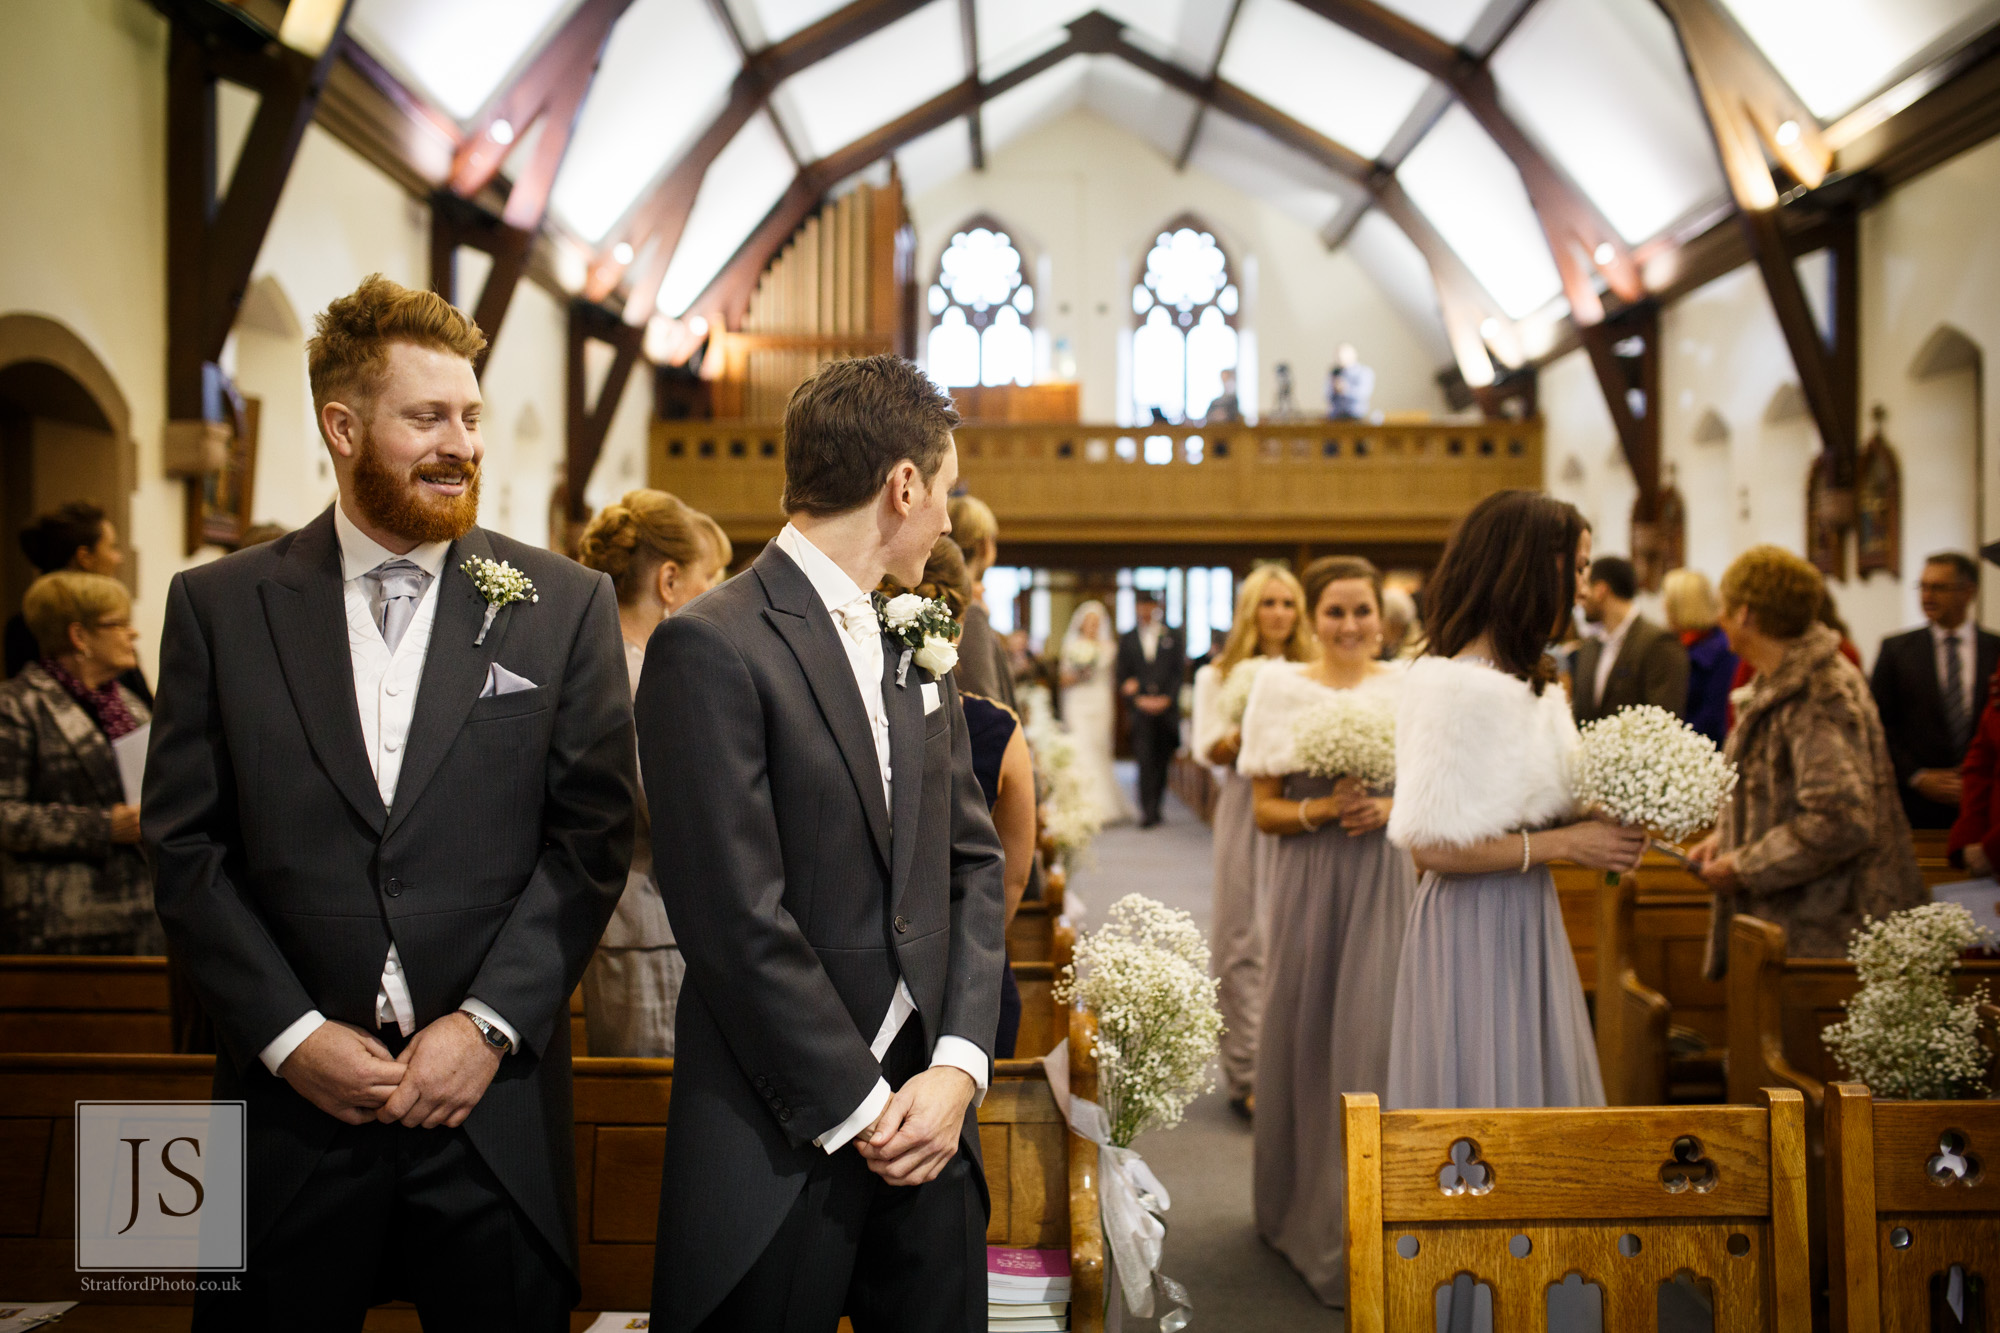 A nervous groom waits for his bride to come odwn the aisle.jpg